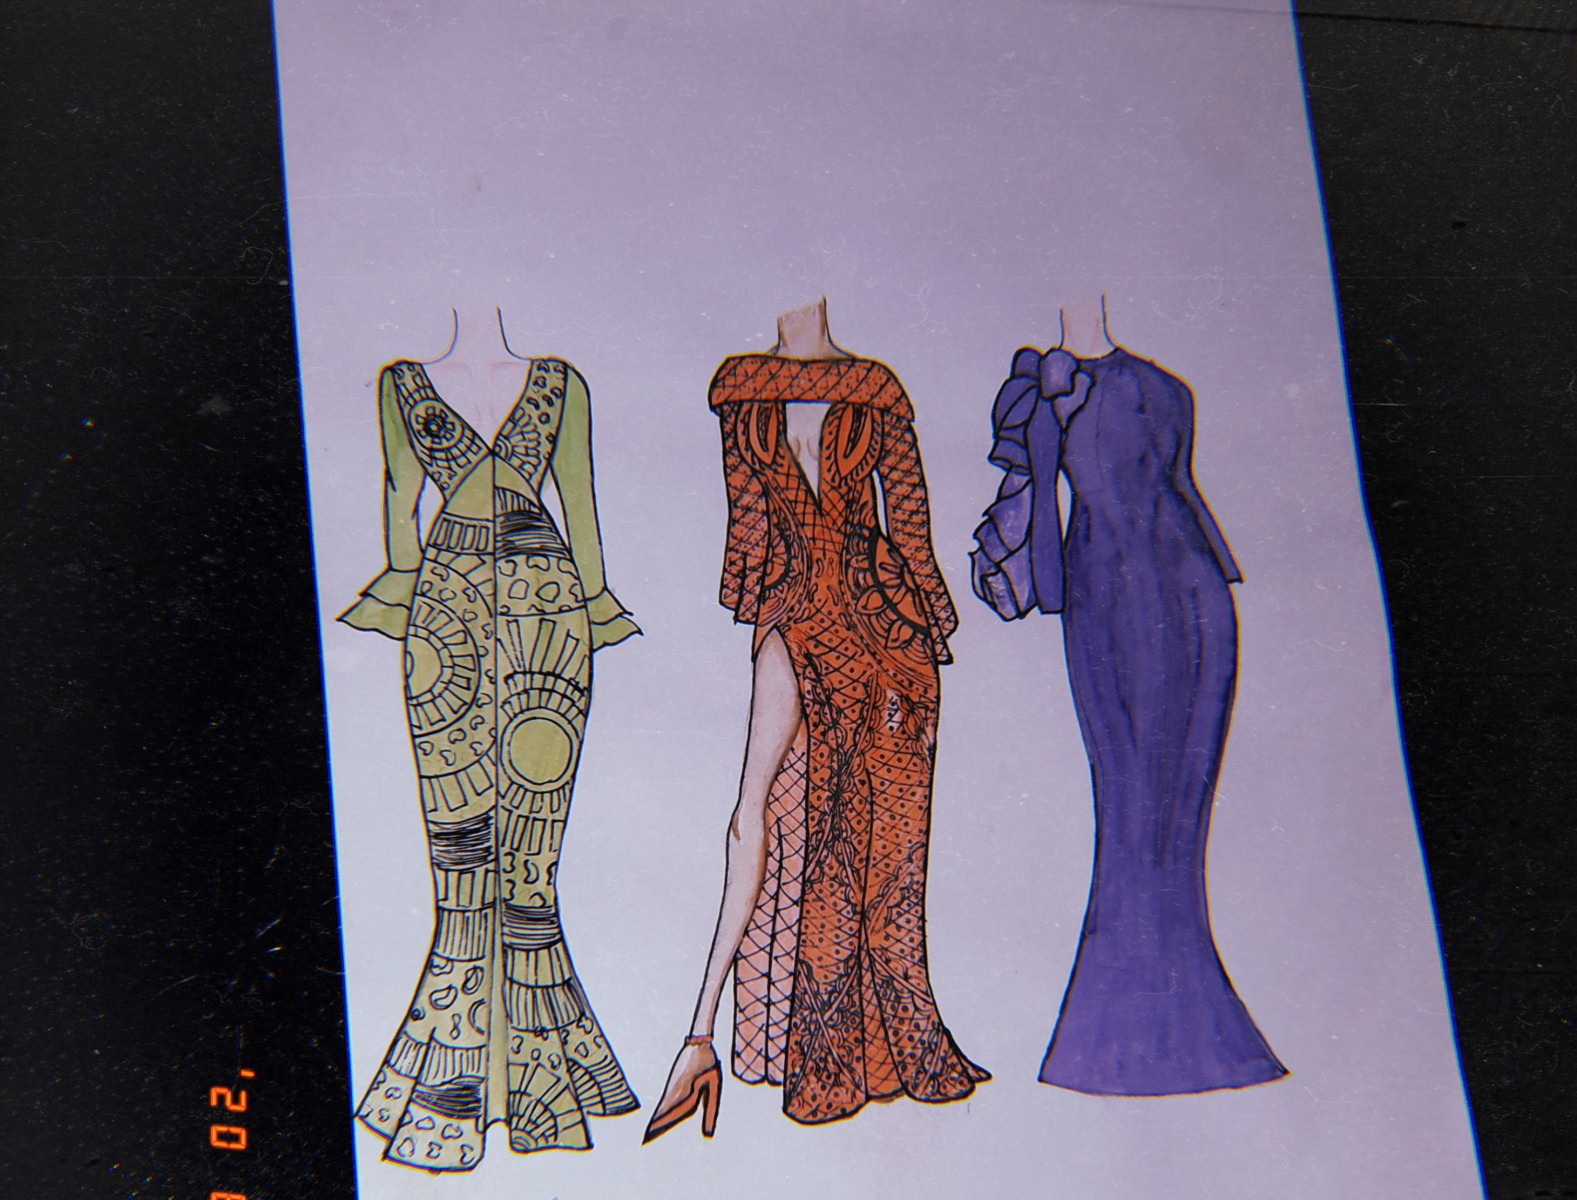 Gorgeous You - It's Time To Do Some Work Actually😄#designer #sketch  #designerlife #westernwear #gowns #eveninggowns #dresses  #blackandwhitesketch #partywear #partyweardress #girlythings #thajrin  #gorgeousyoudesigns #gorgeousyou | Facebook